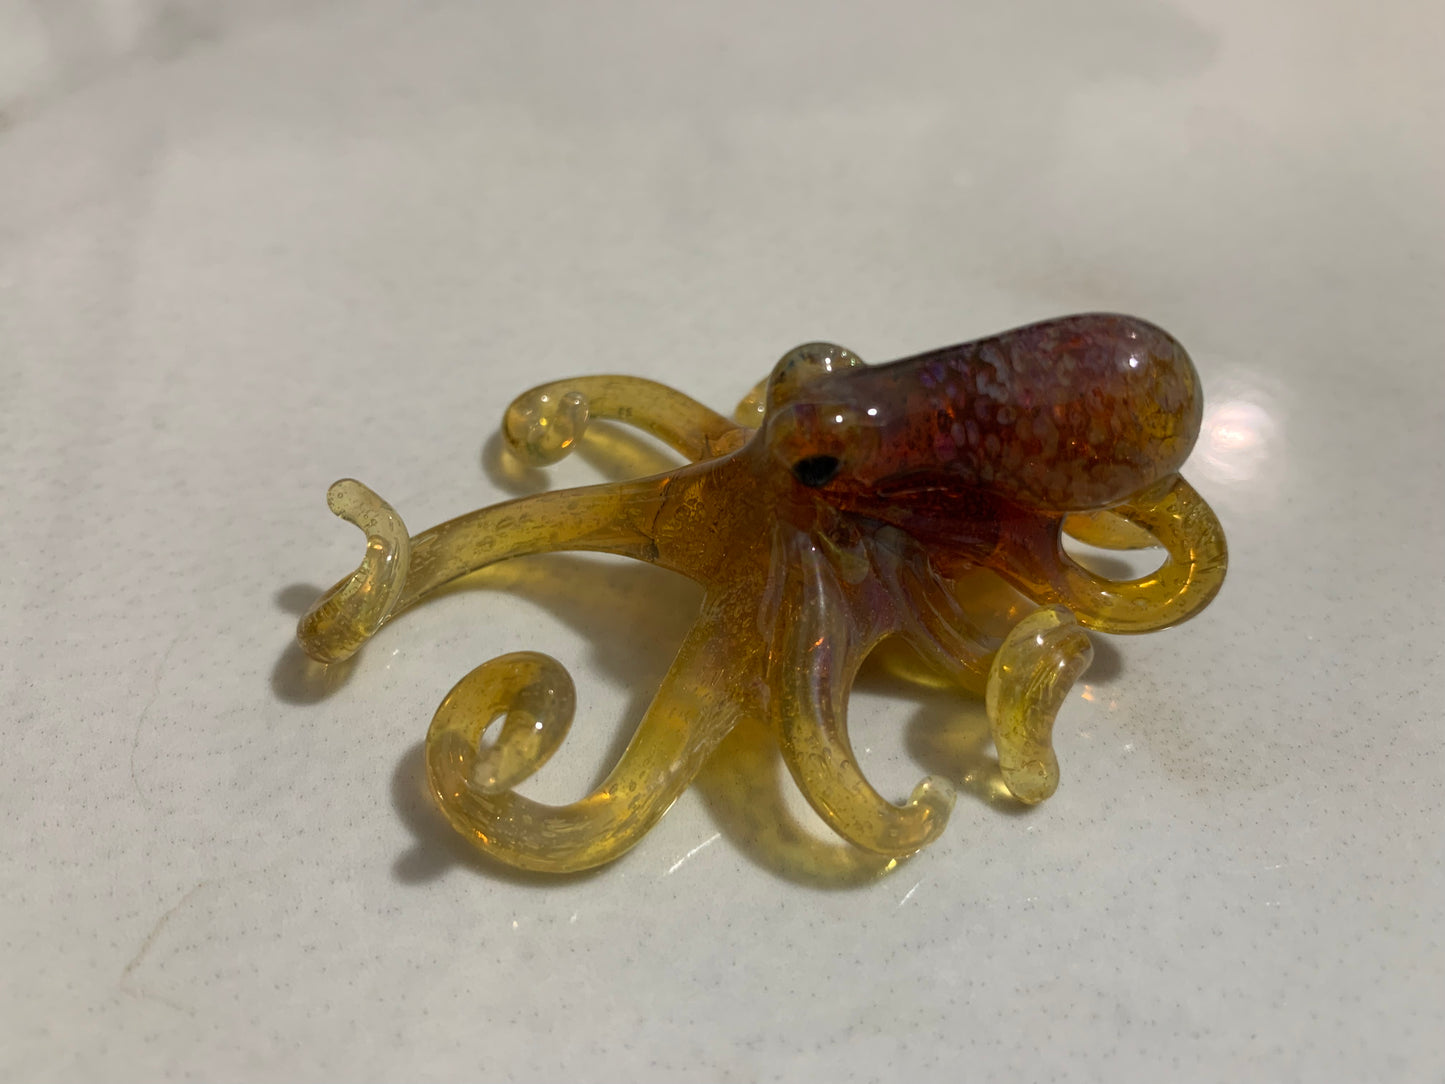 Octopus Necklace Blown Glass Pendant for Men or Women Art Deco Personal Jewelry